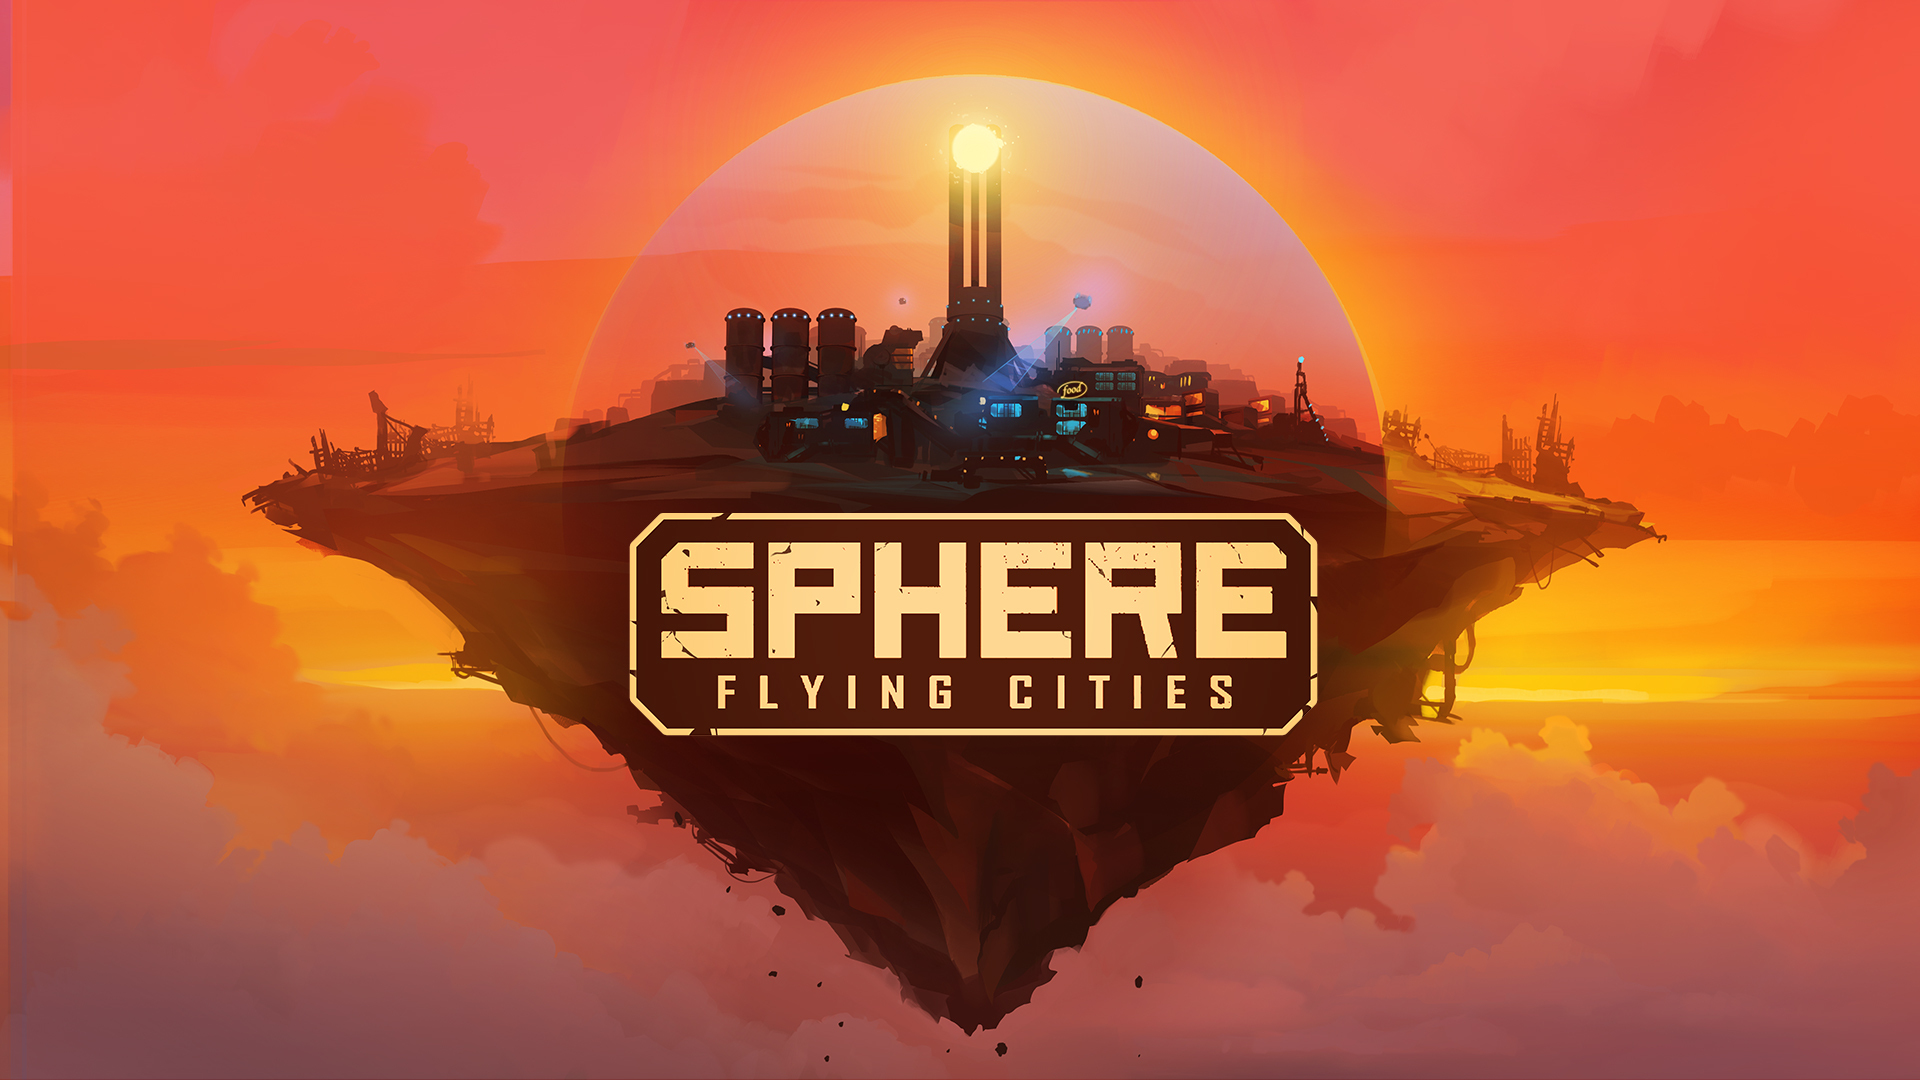 the full version of sphere flying cities is available for pc via steam and gog